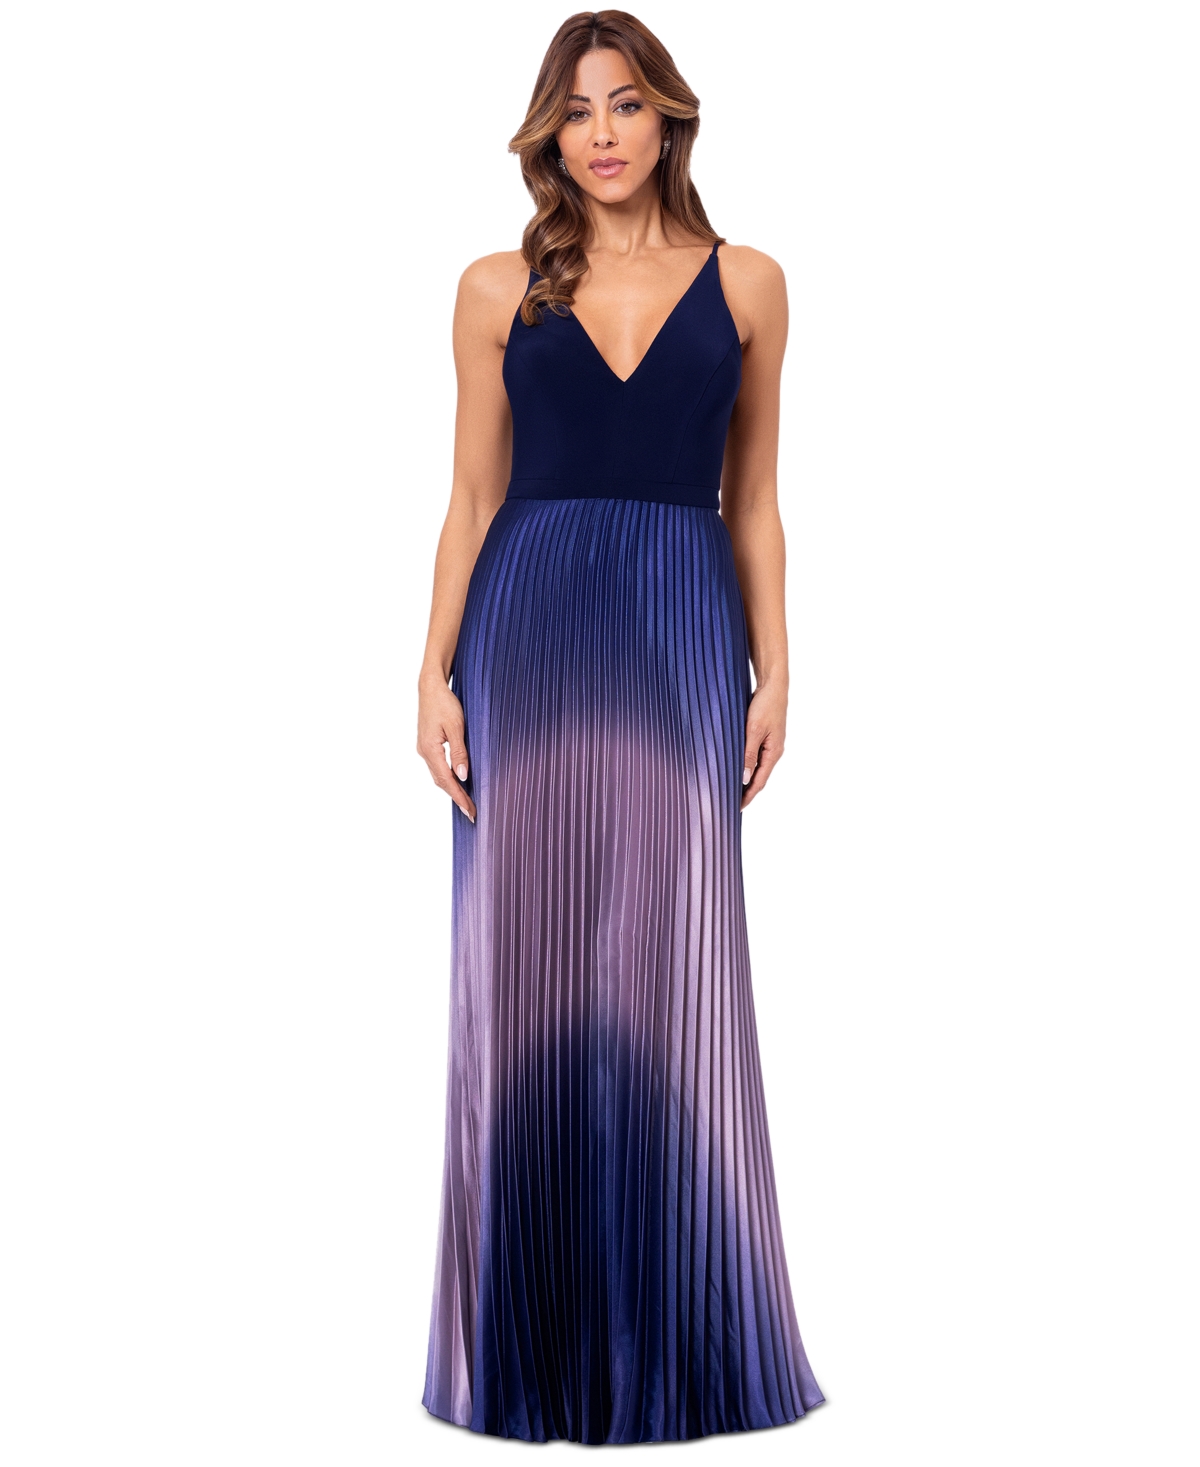 Women's Ombre Pleated Gown - Navy/Mauve